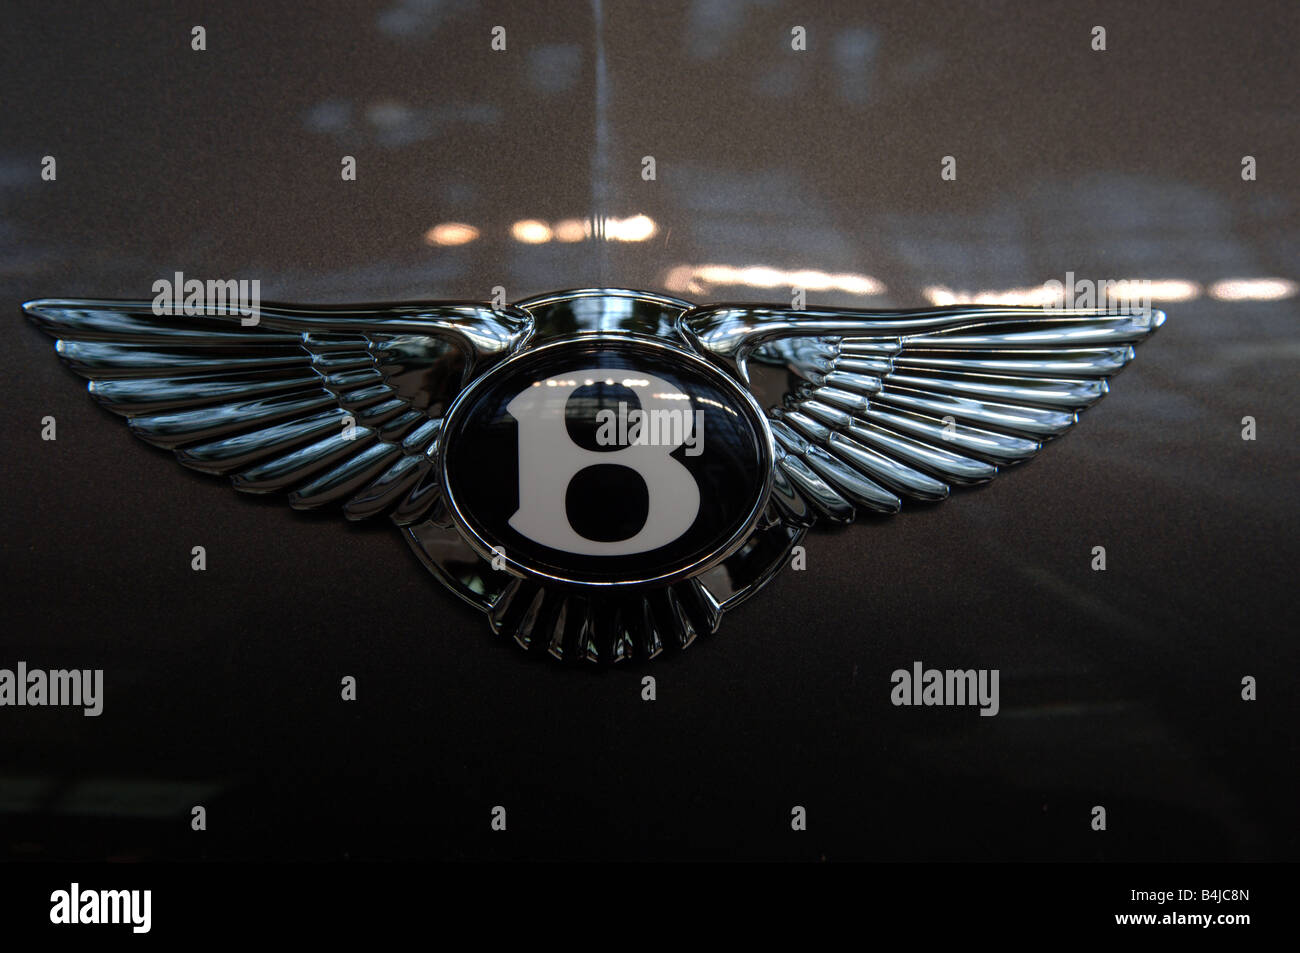 A Bentley logo on a luxury vehicle on display at the World Financial Center  New York Motorexpo Frances M Roberts Stock Photo - Alamy